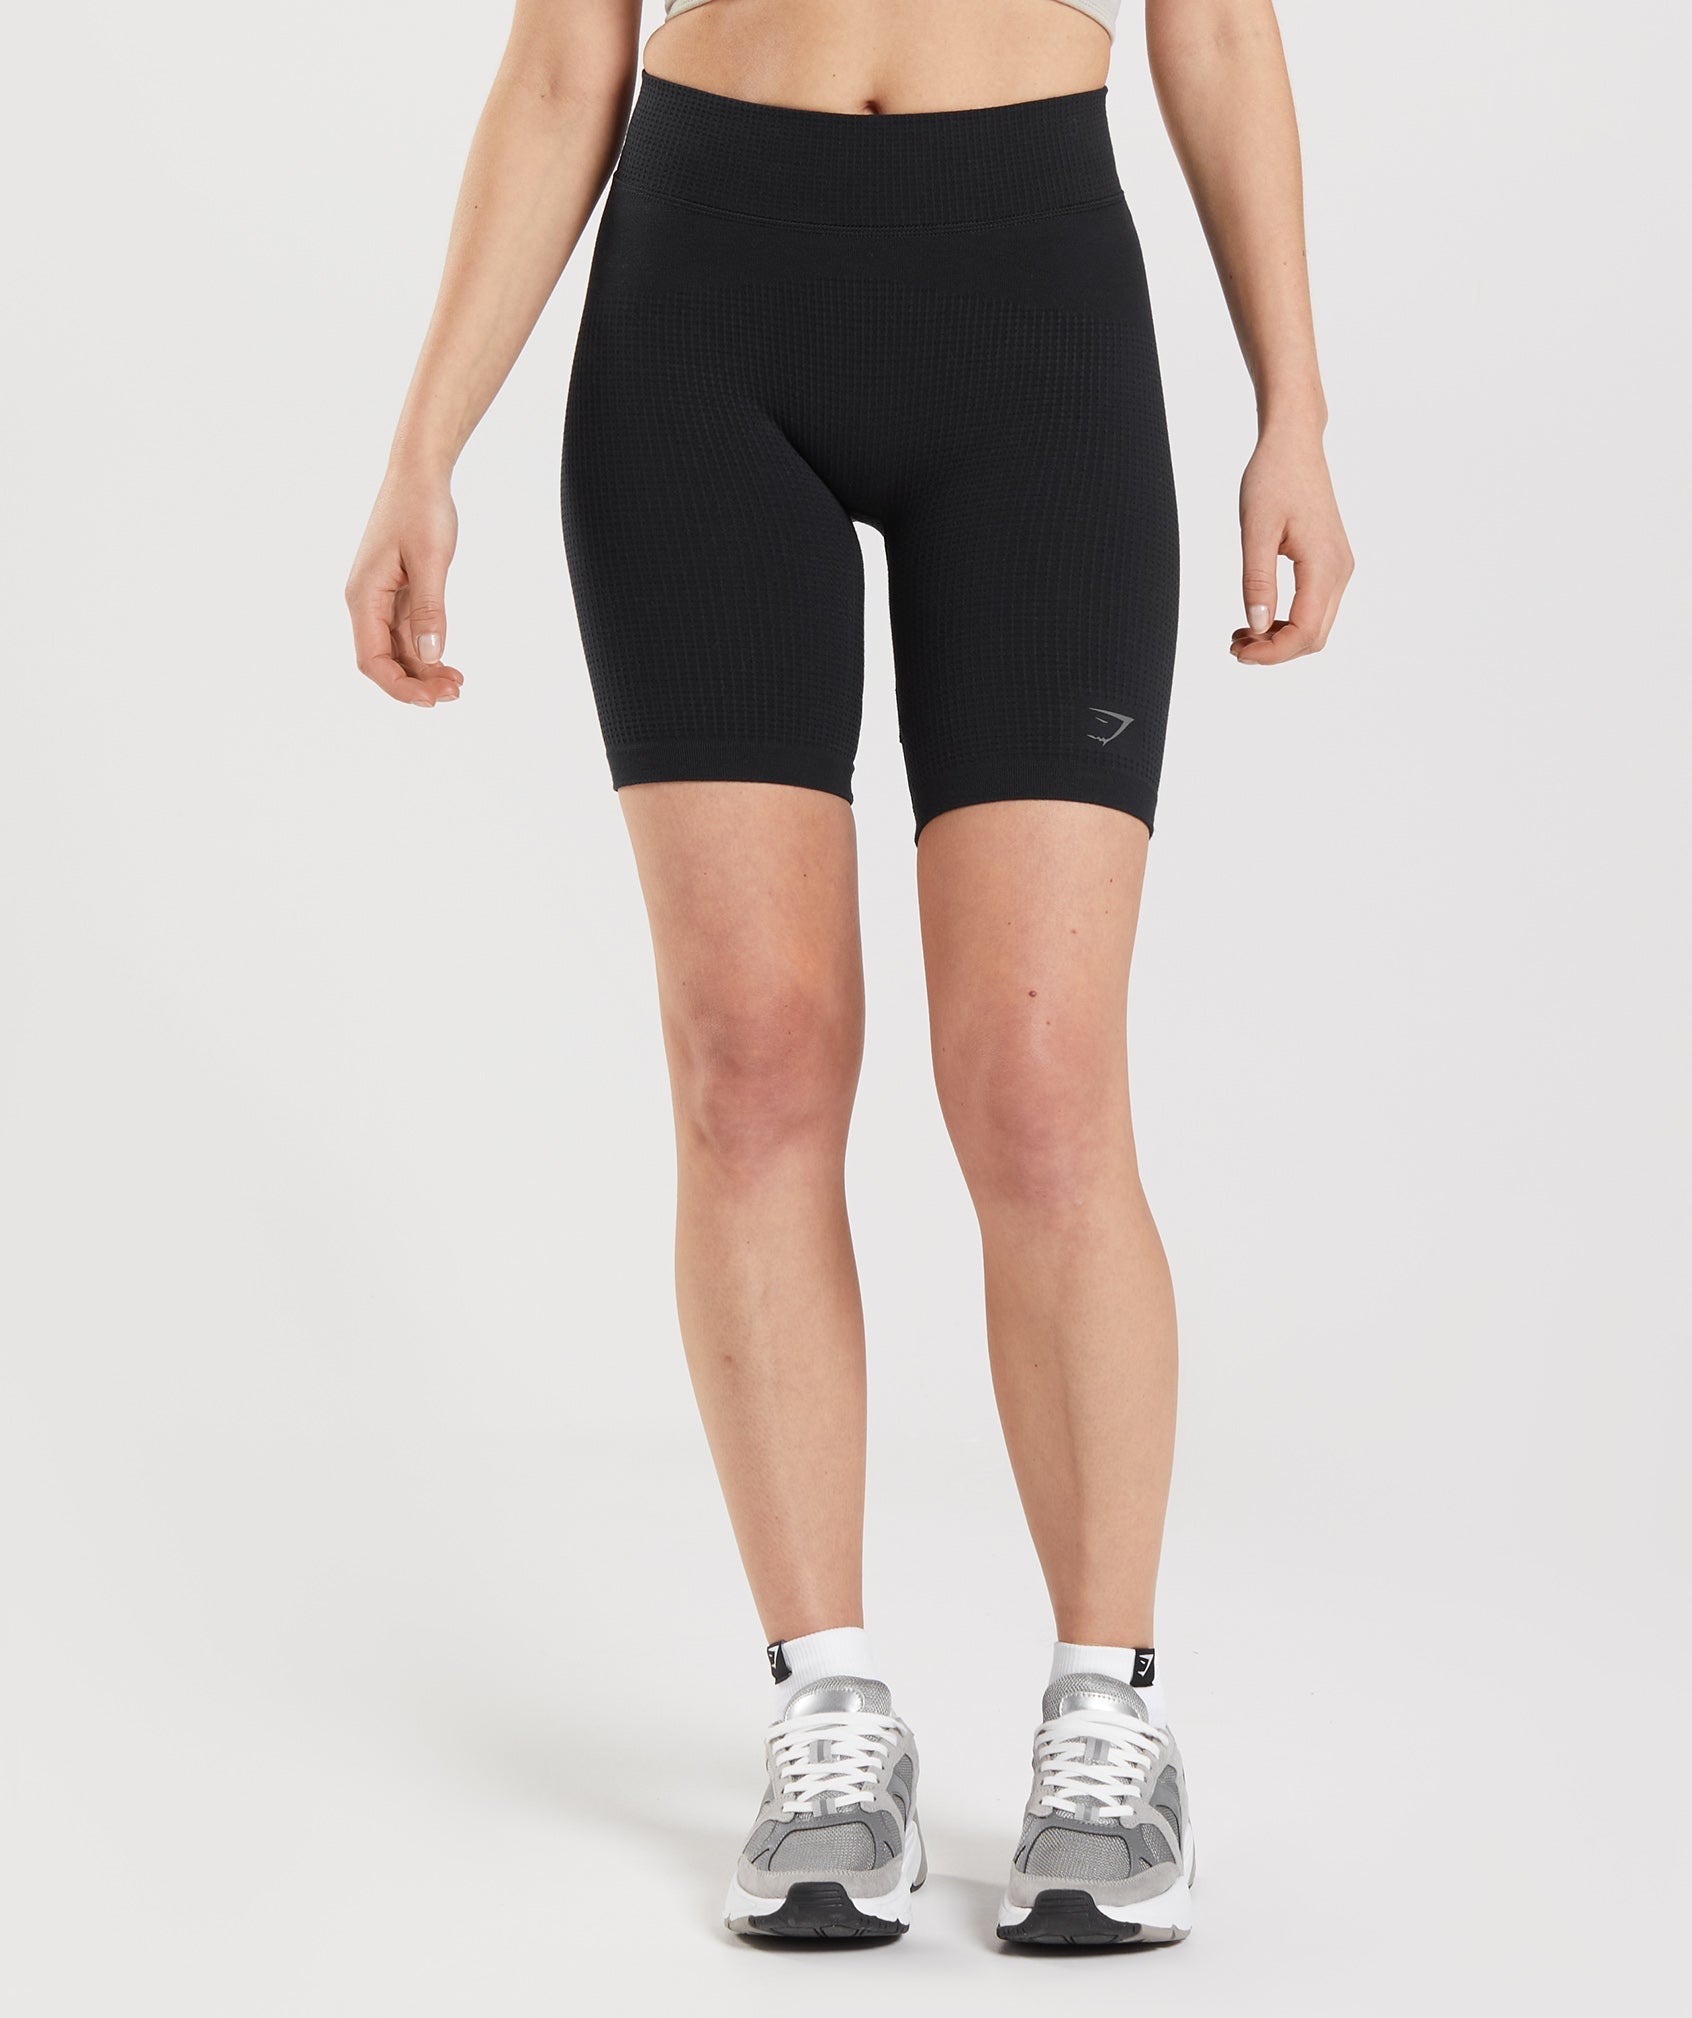 Pause Seamless Cycling Shorts in Black - view 1